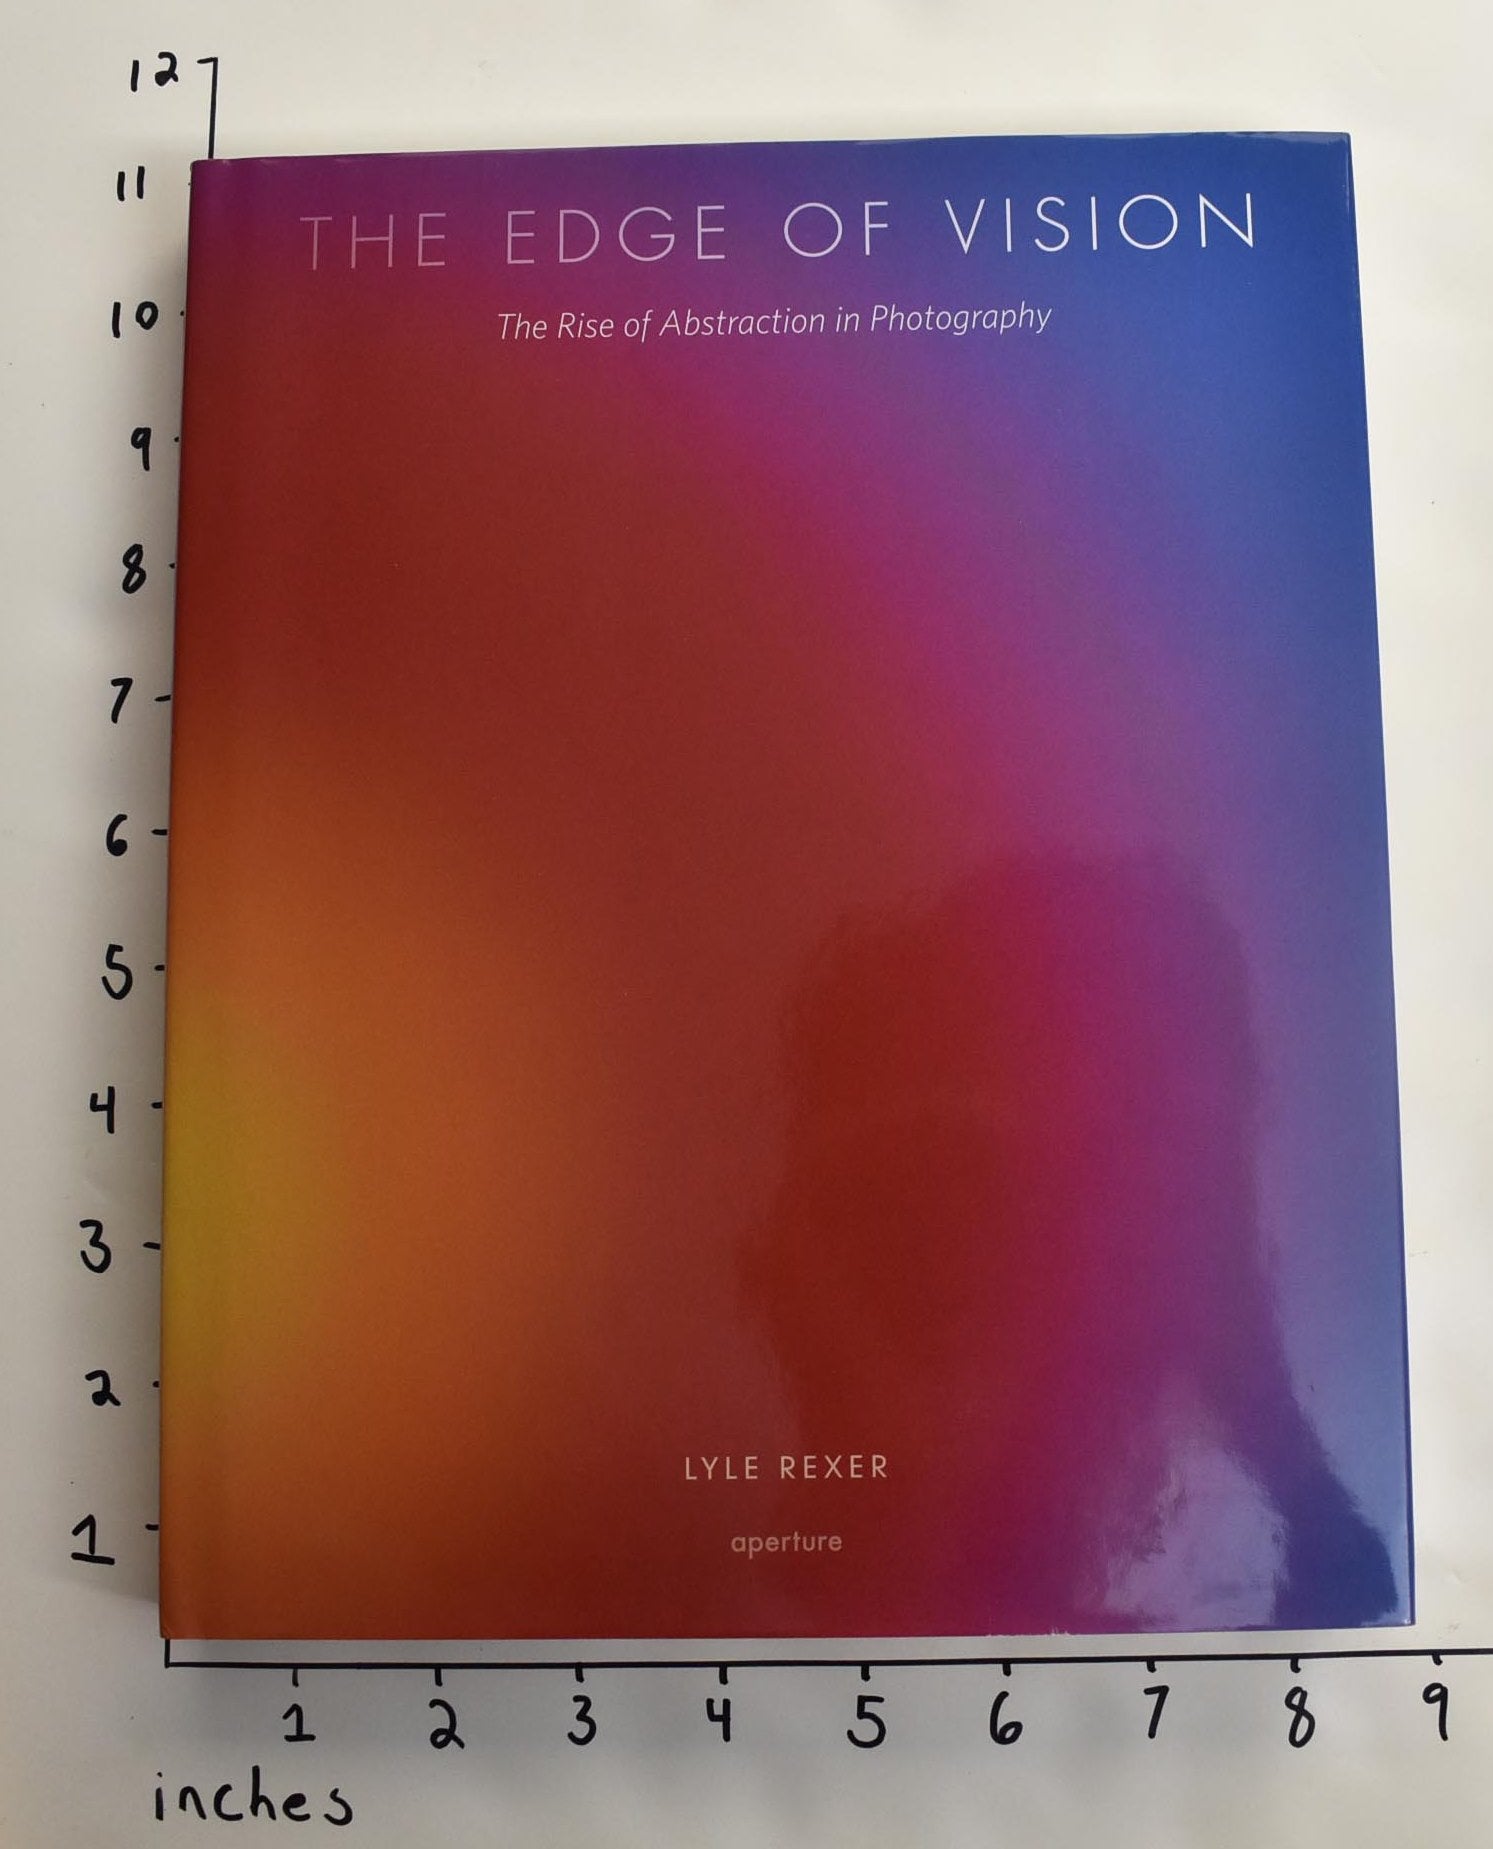 The Edge of Vision